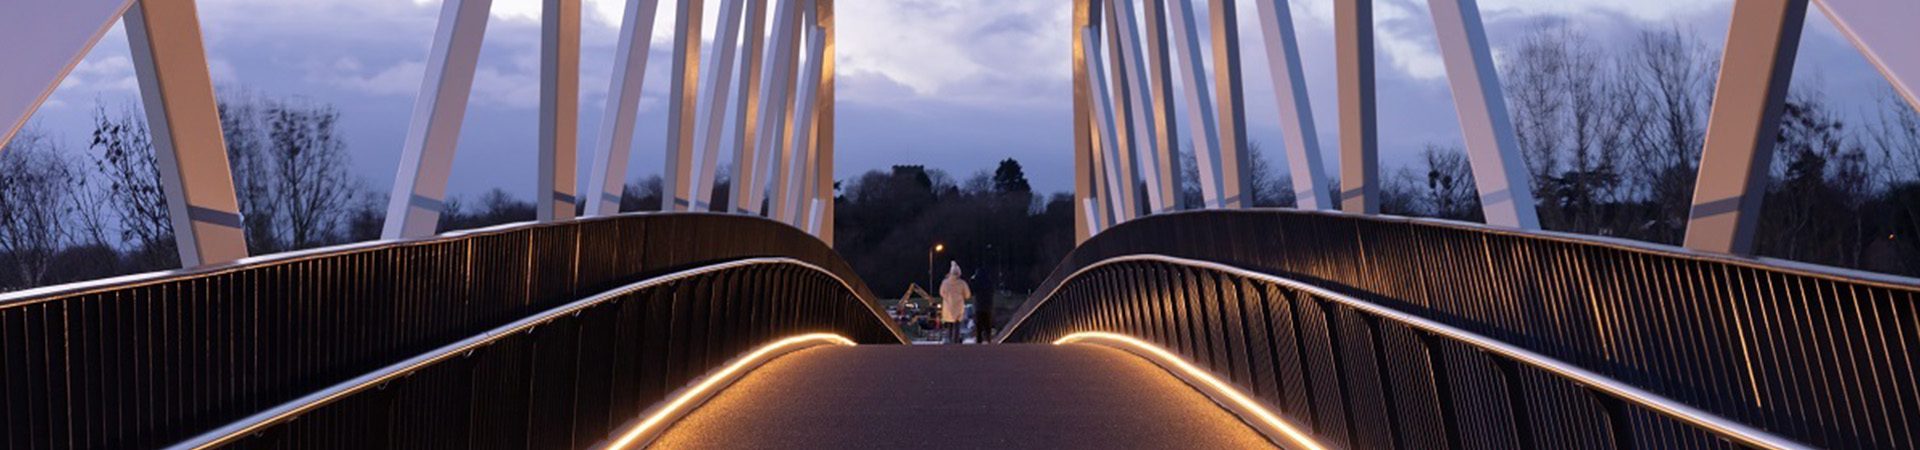 Bridge at night made from steel